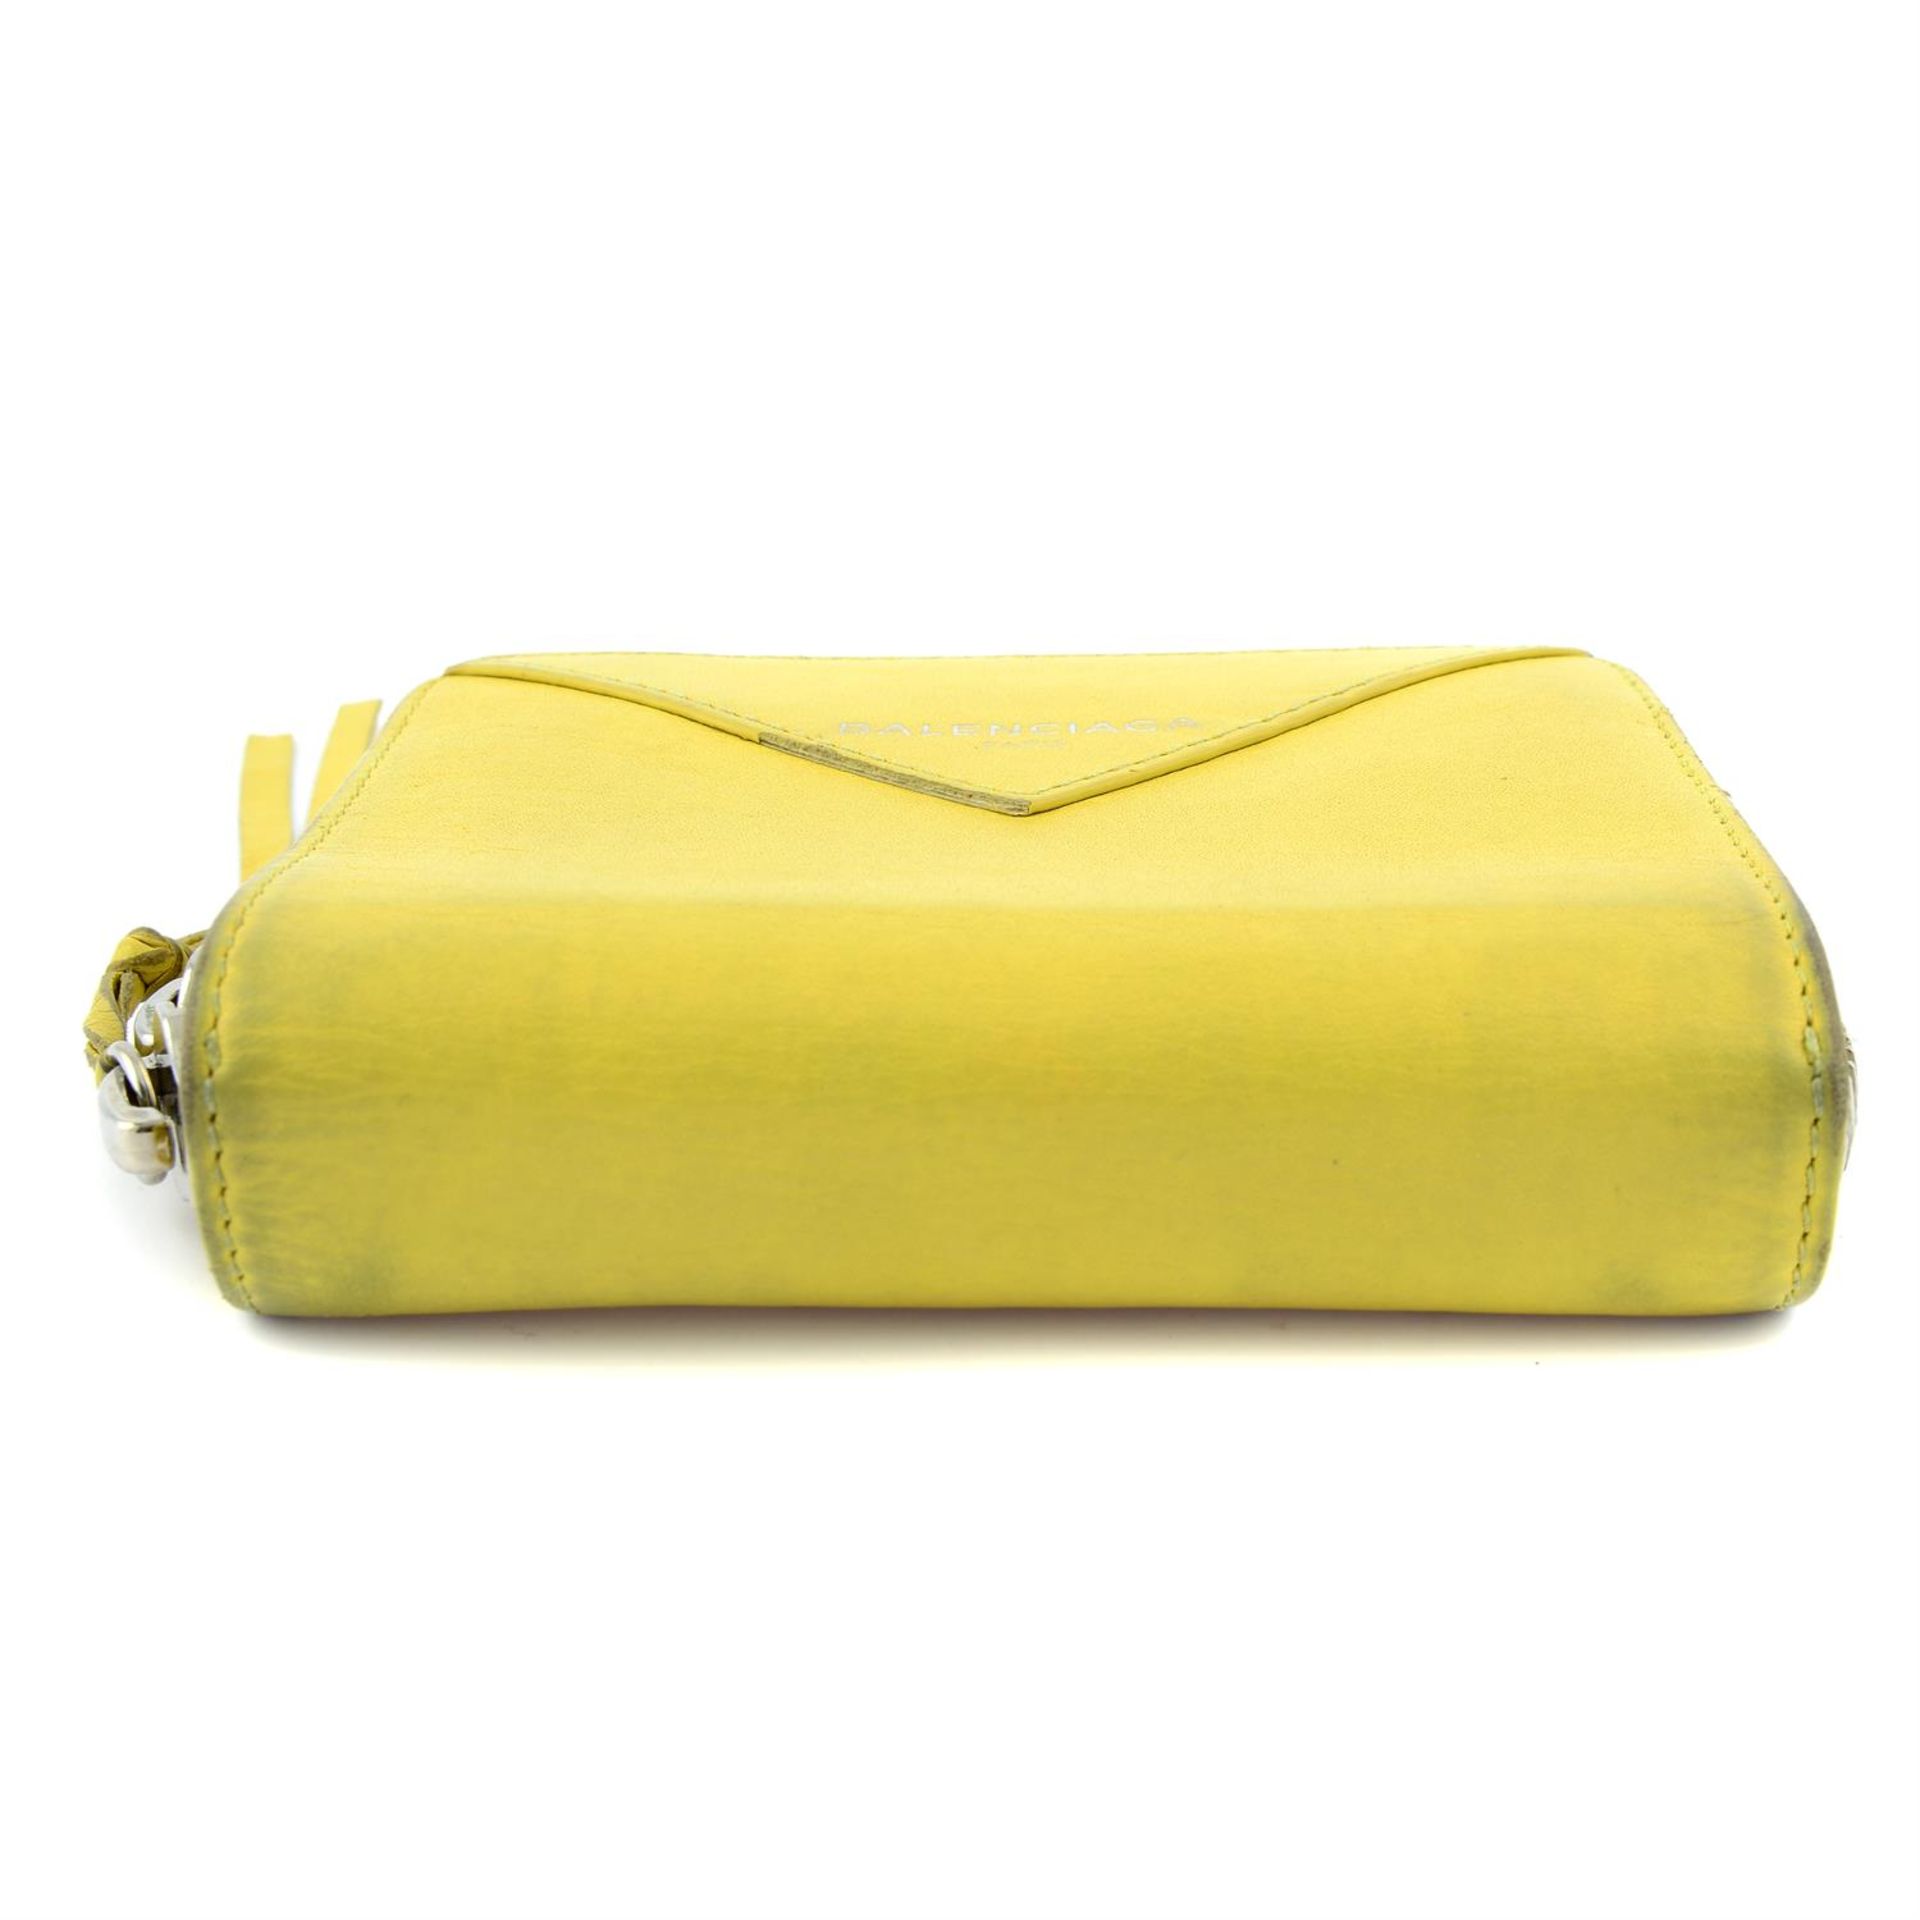 BALENCIAGA - a chartreuse leather compact wallet. - Image 3 of 5